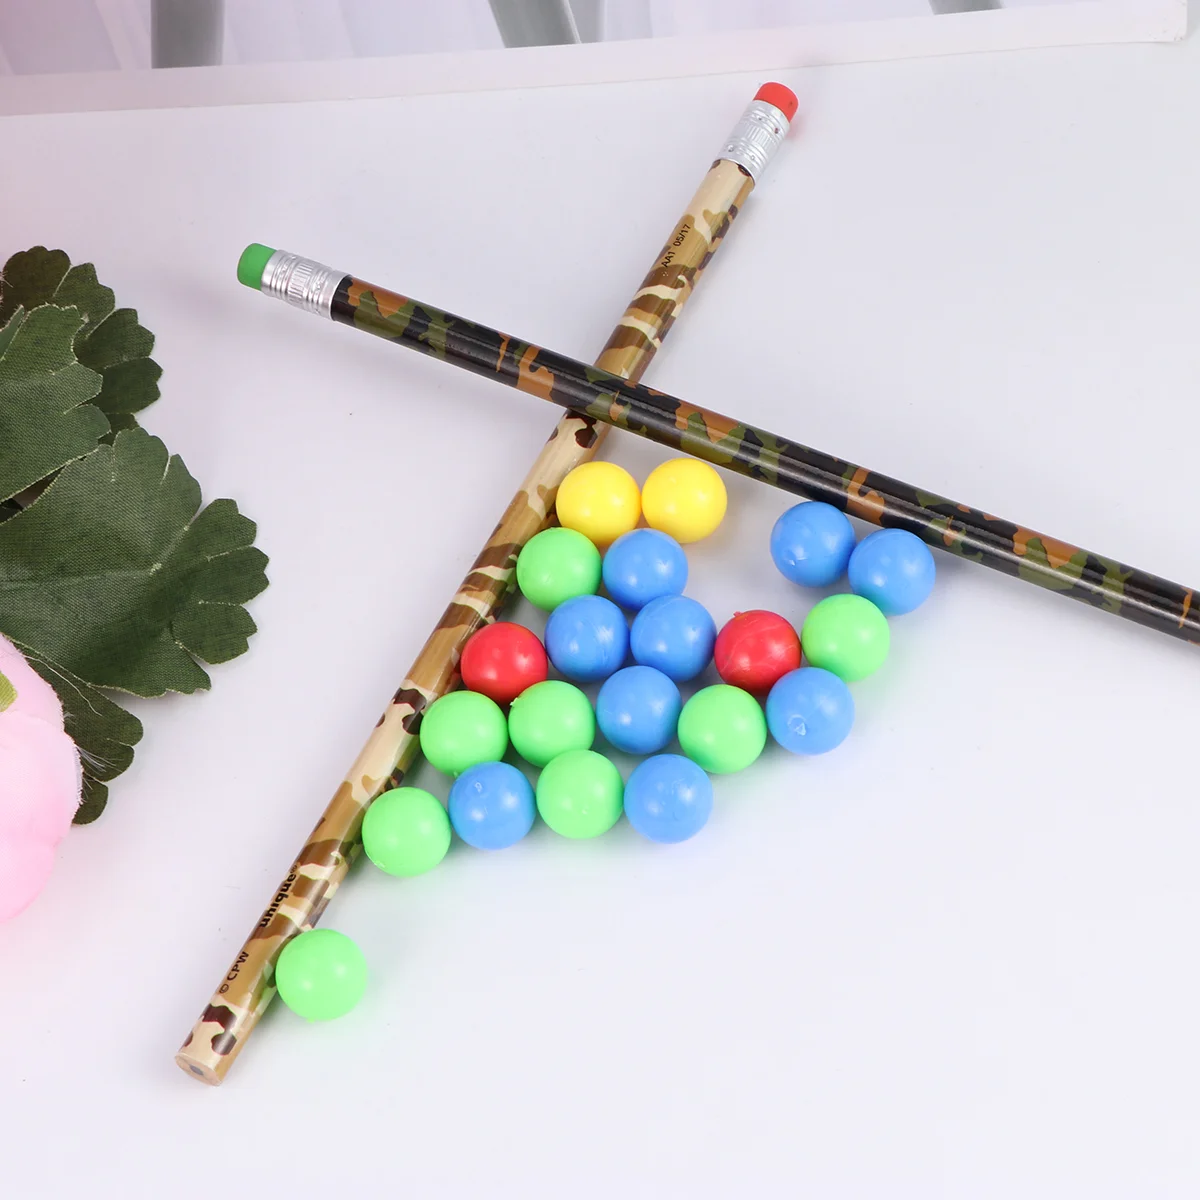 

Game Replacement Balls Plastic Colorful Games Beads Compatible for Hungry Hippos Swallowing Beads Game Toy (Random Color)